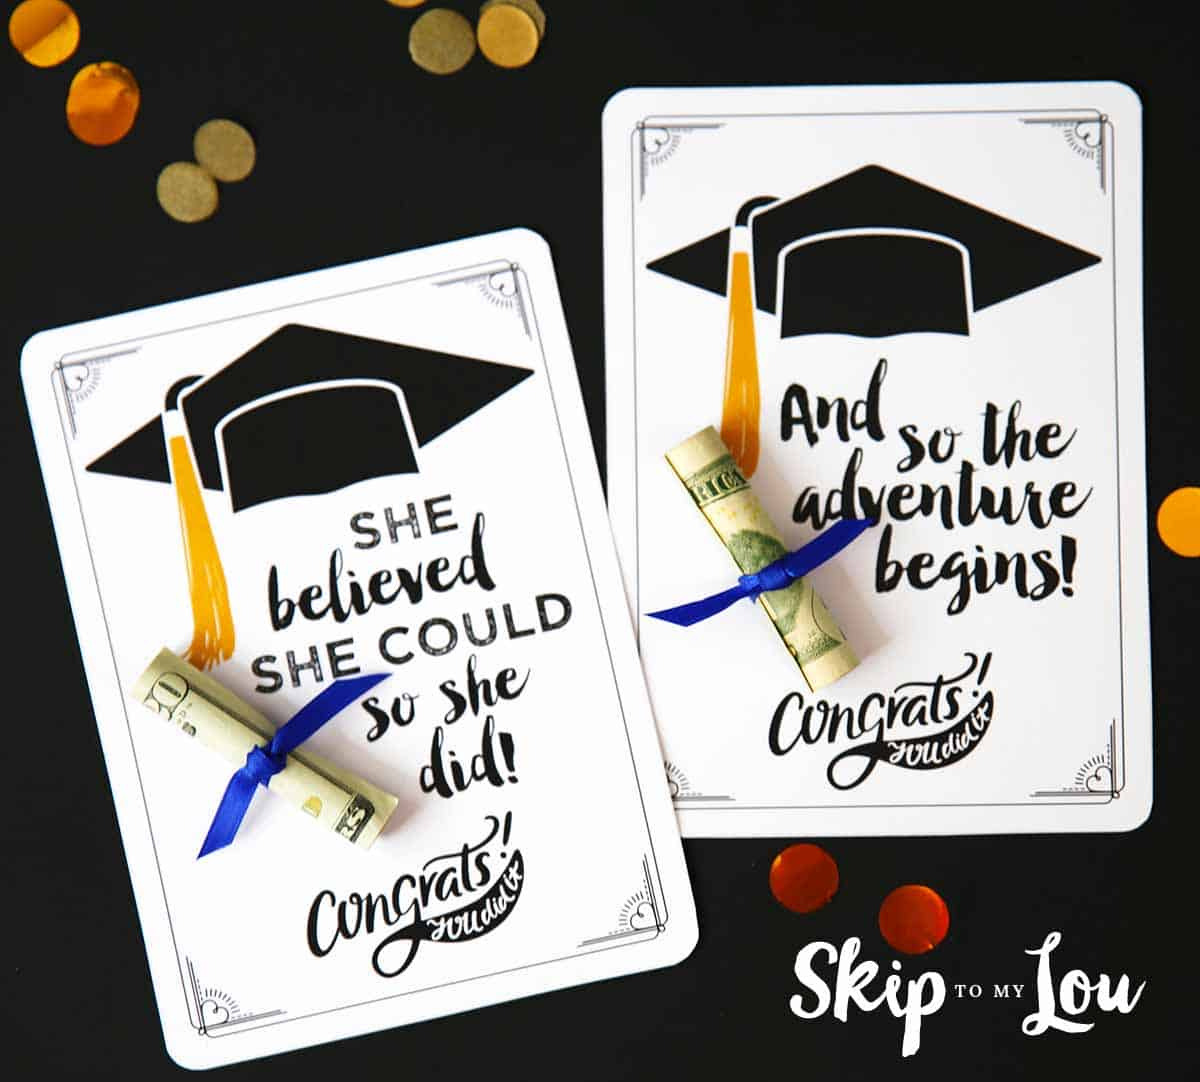 Free Graduation Cards With Positive Quotes And Cash! in Free Graduation Printables